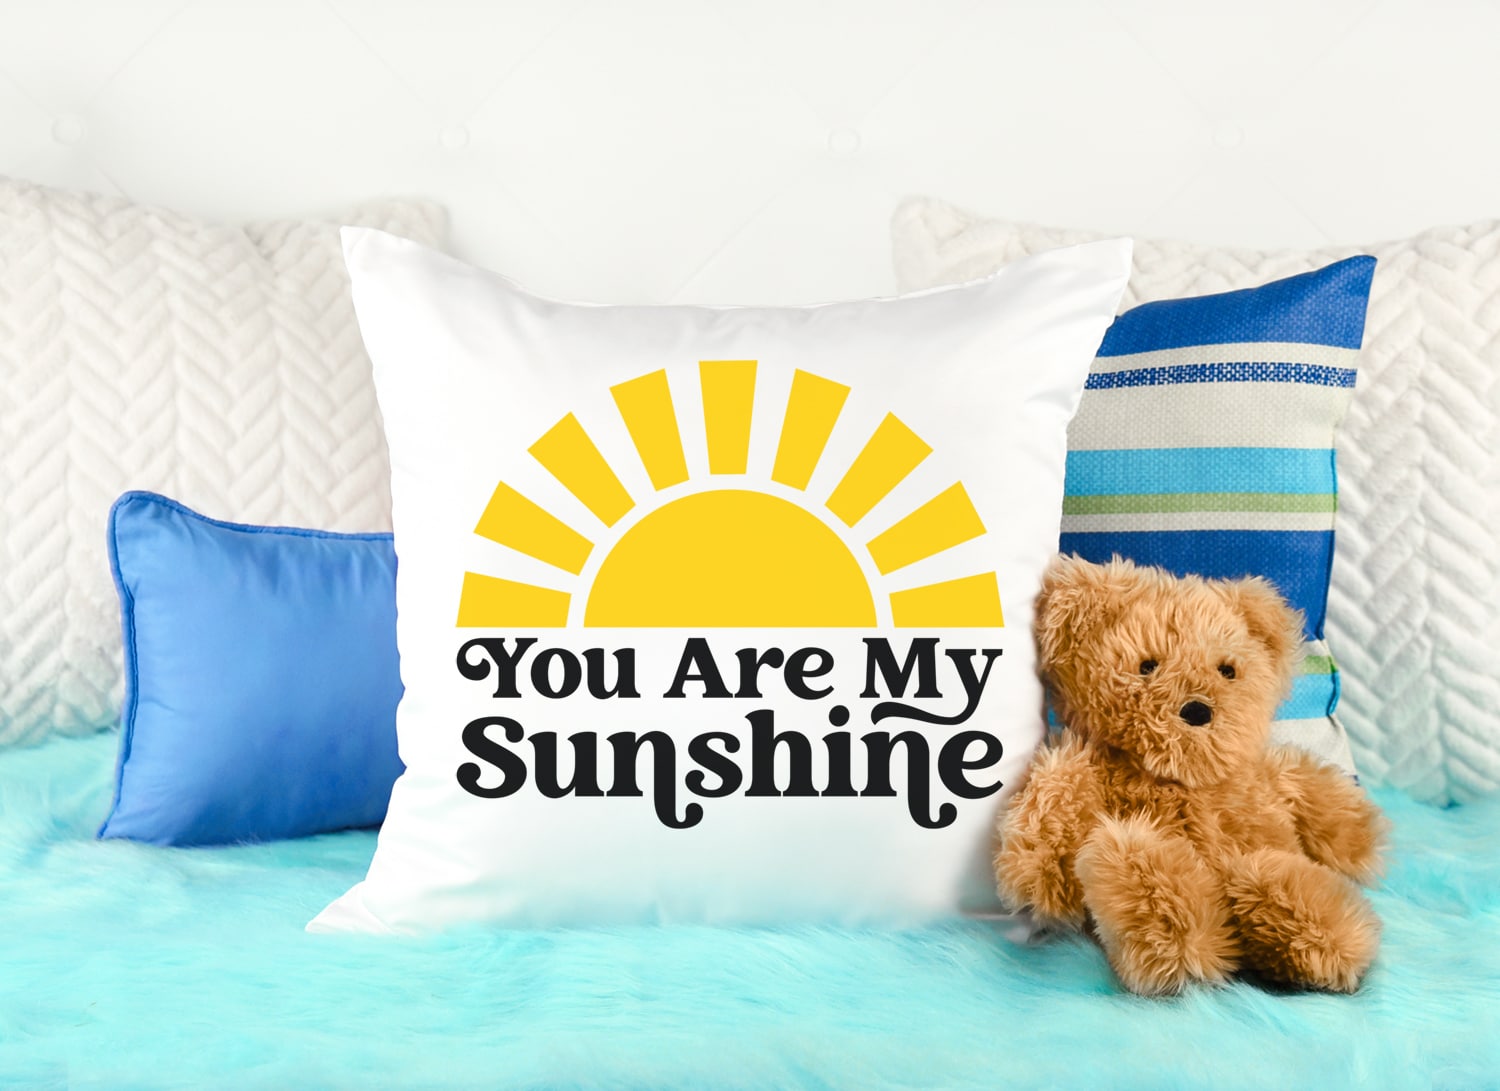 you are my sunshine svg file on white pillow with teddy bear